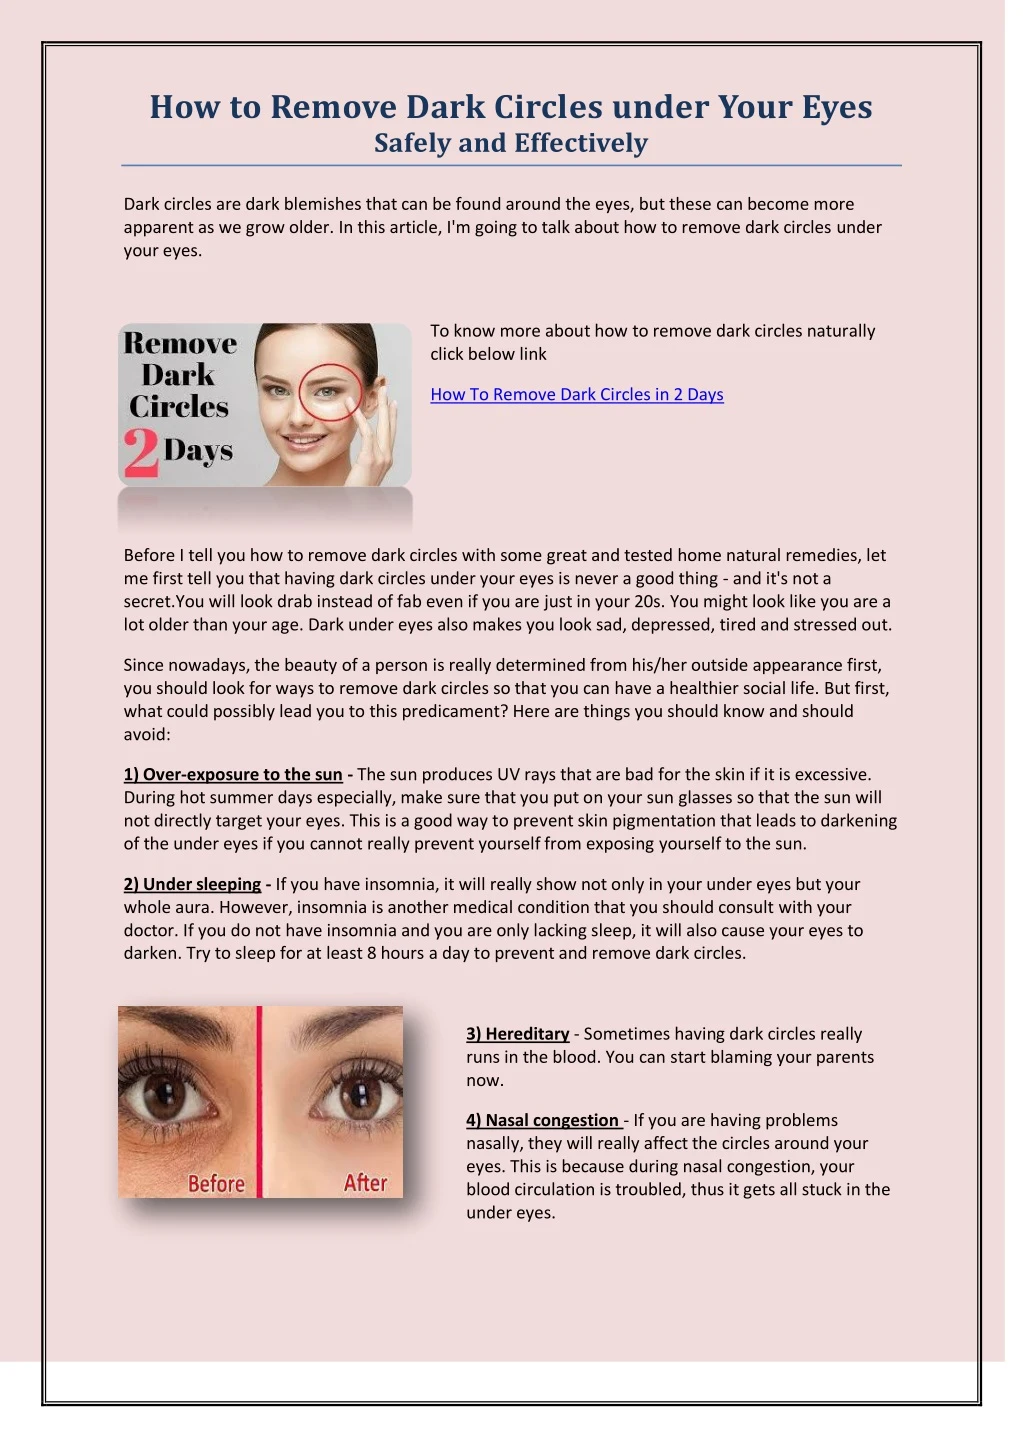 how to remove dark circles under your eyes safely